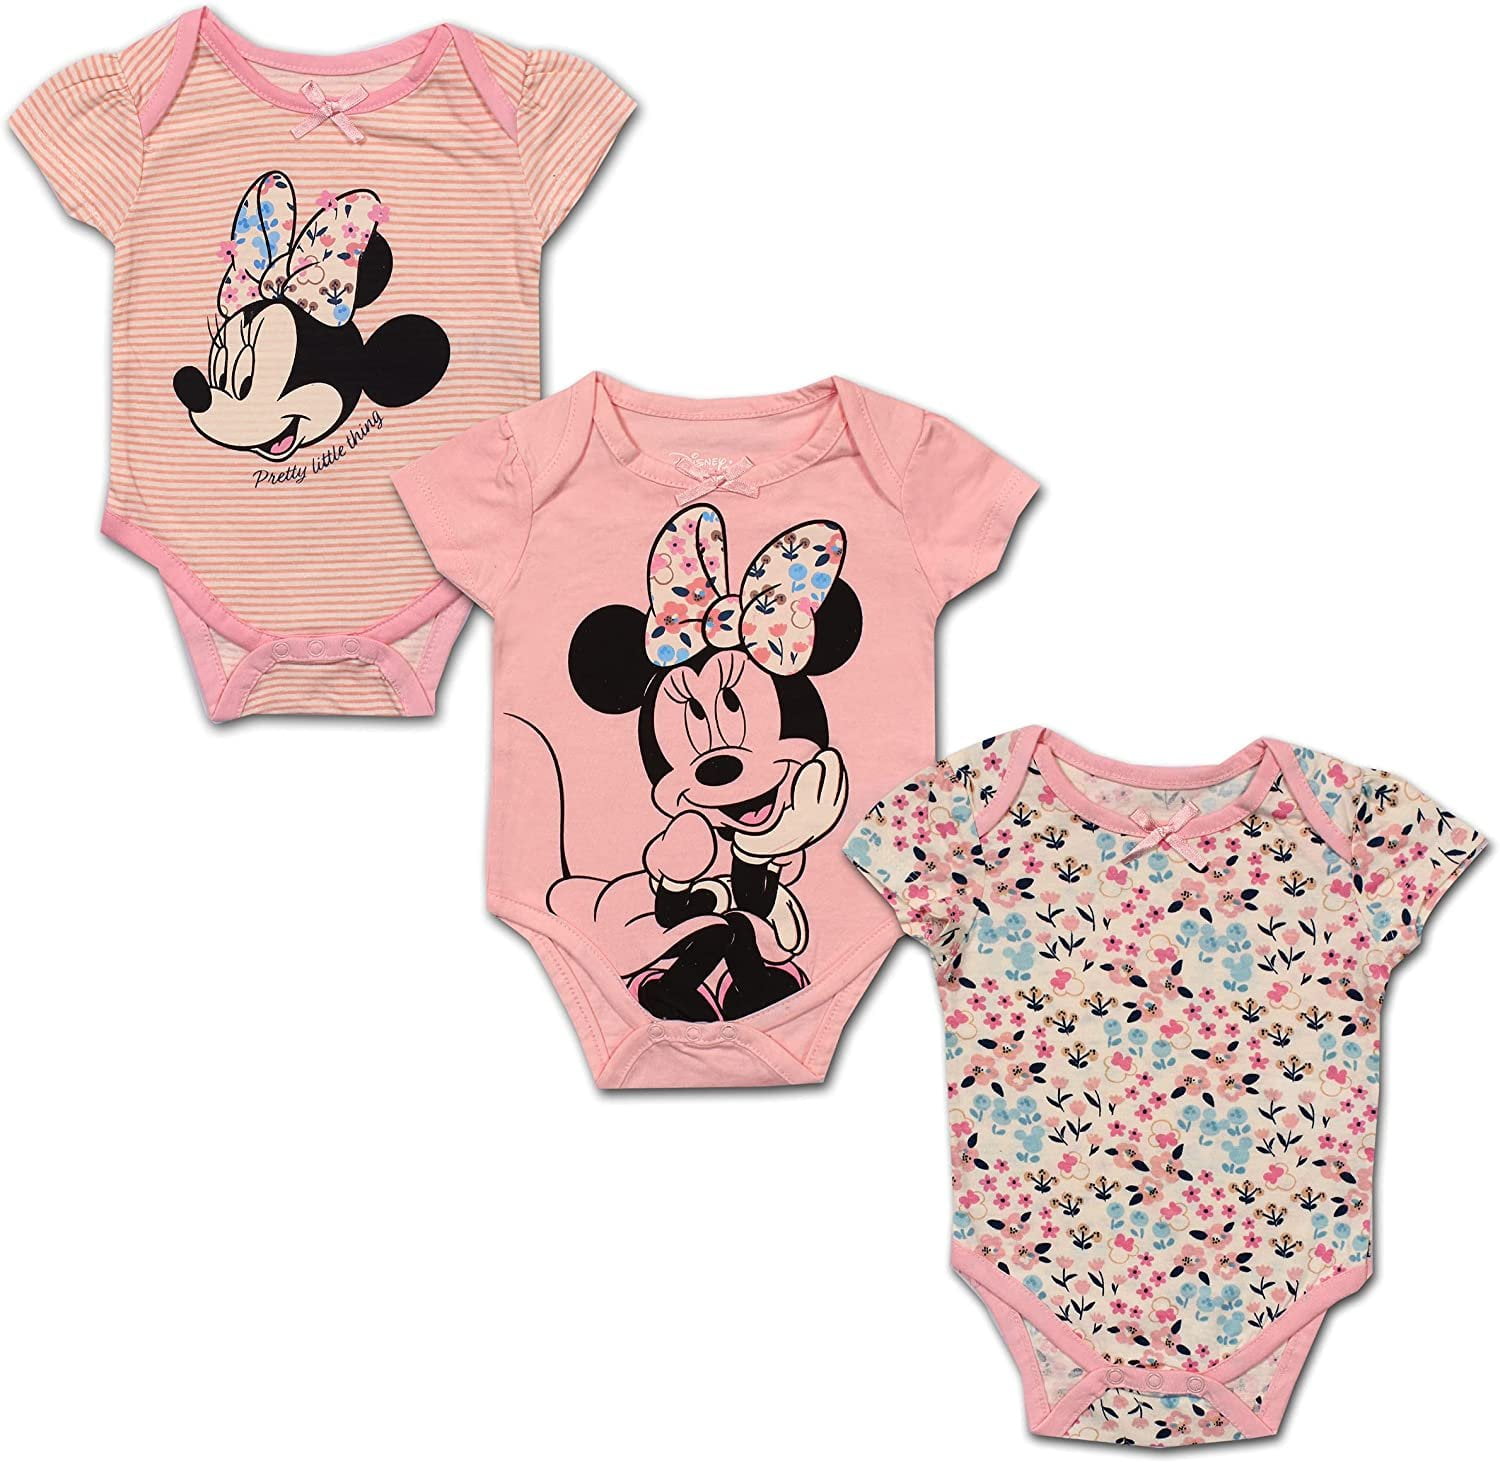 Pink Disney Girl's 4-Pack Minnie Mouse Bodysuit Creeper with 12 Milestone Stickers 0-12 Months